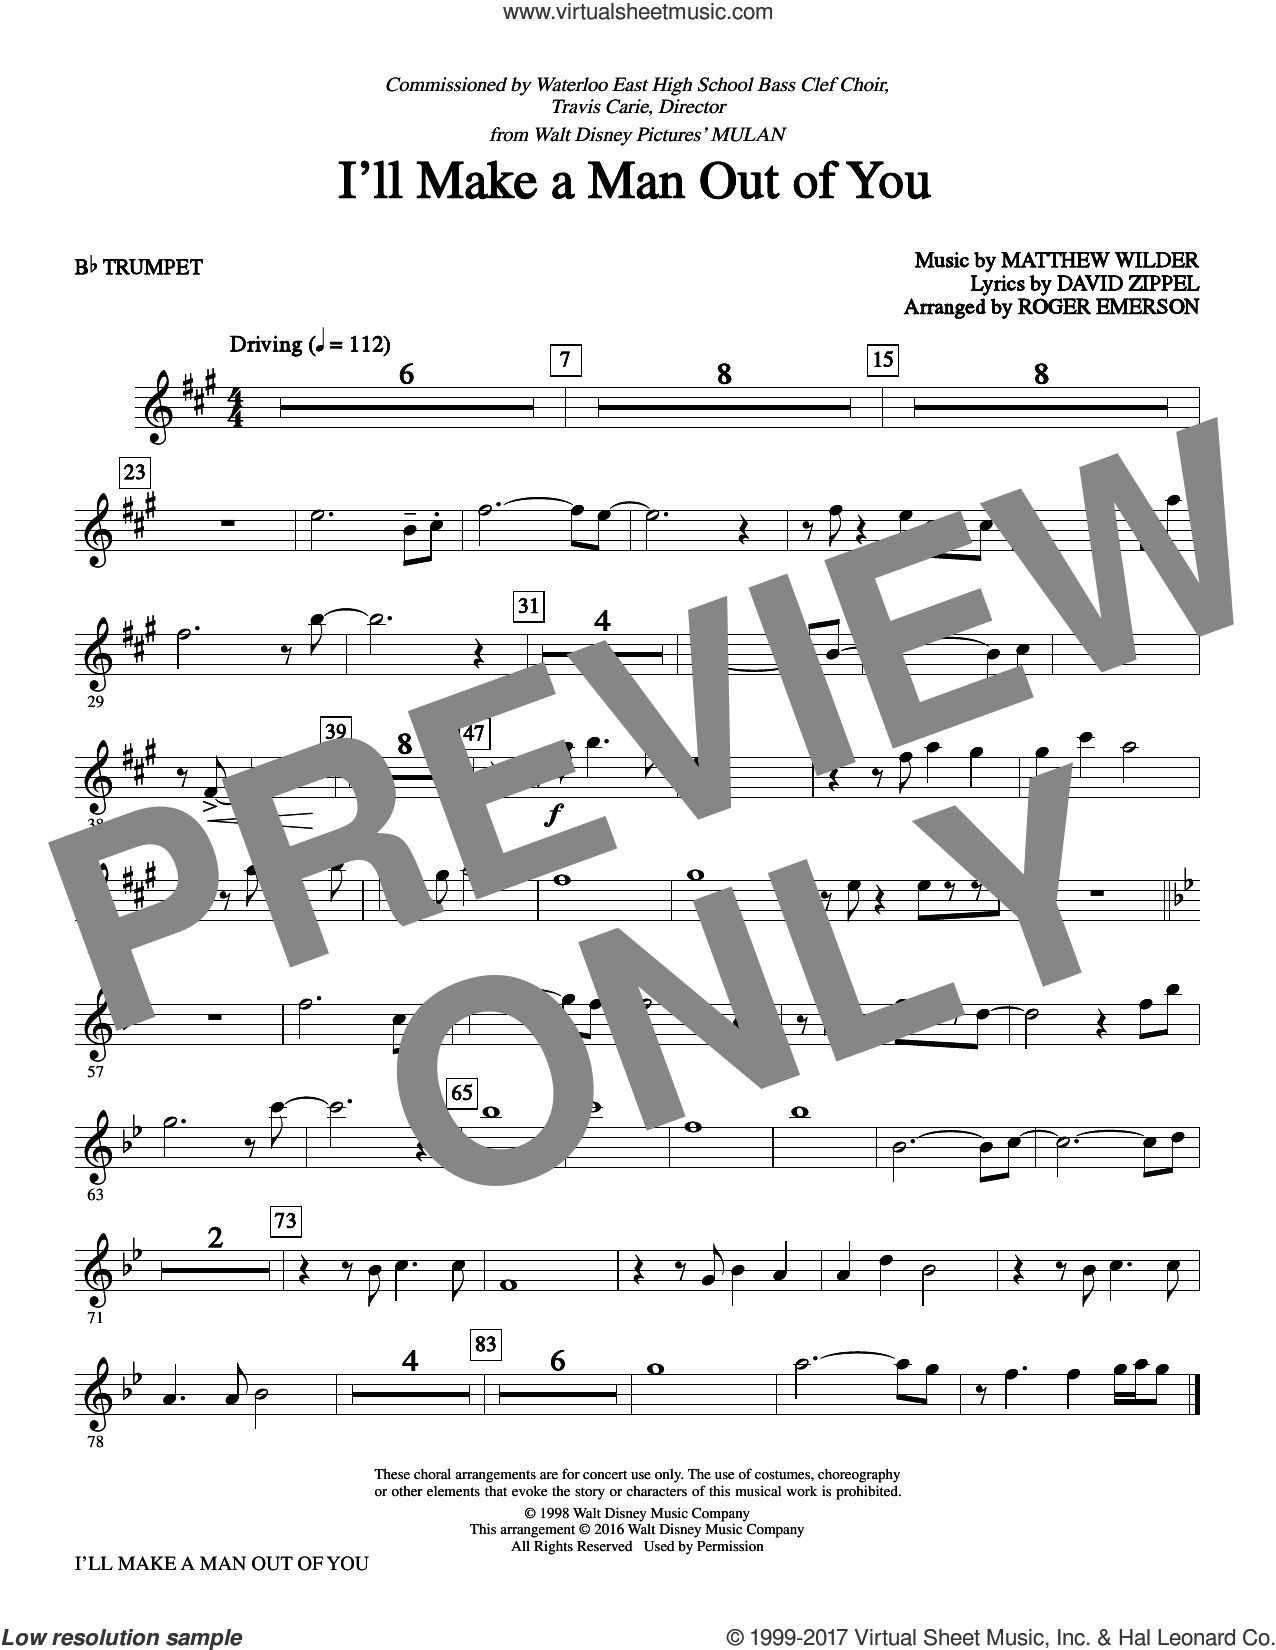 Emerson I Ll Make A Man Out Of You From Mulan Arr Roger Emerson Complete Set Of Parts Sheet Music For Orchestra Band